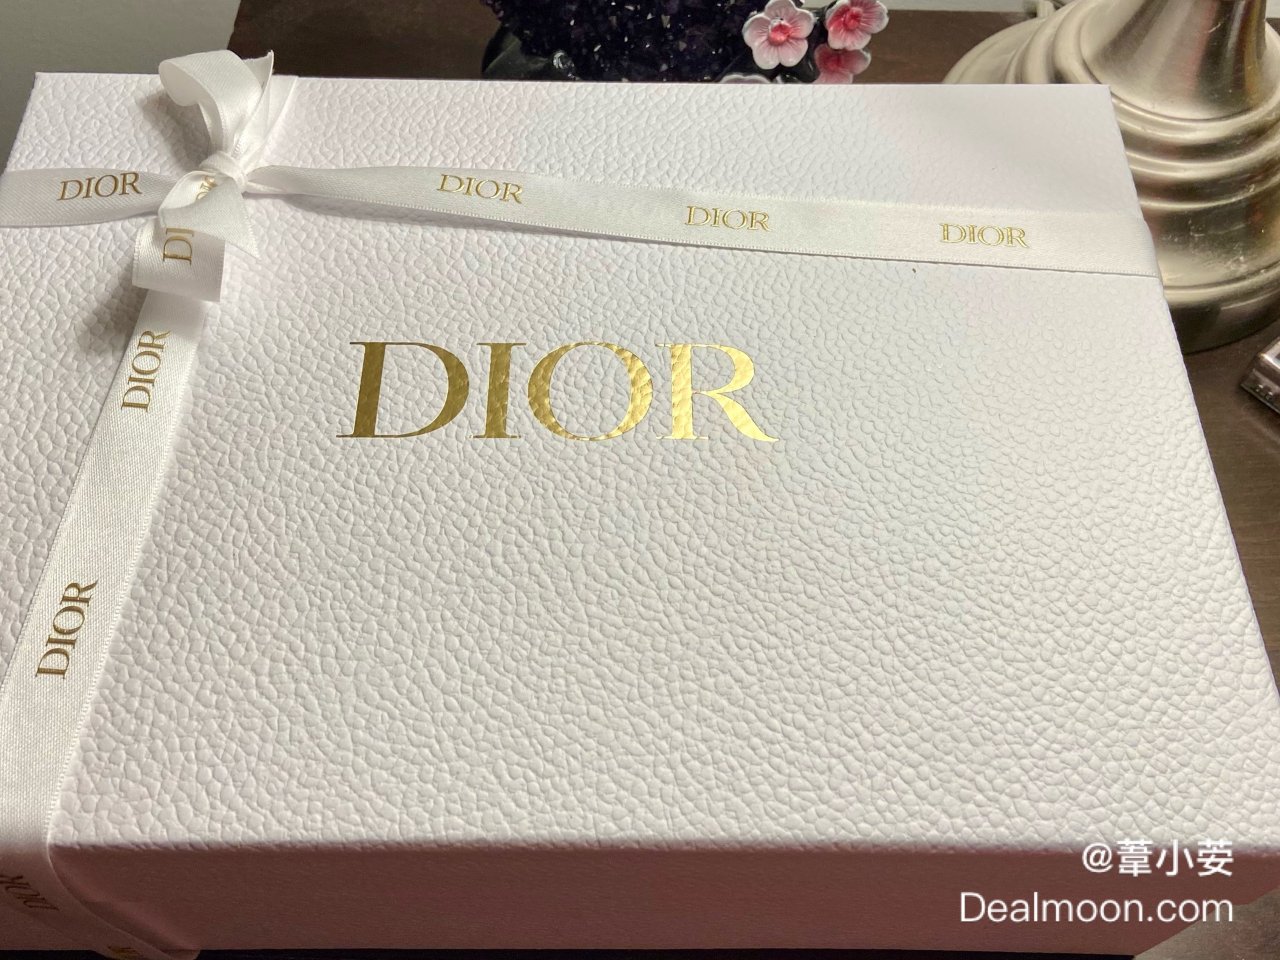 Dior 迪奥,DIOR US Beauty: Luxury Fragrances, Cosmetics, Skincare & Gifts | DIOR US